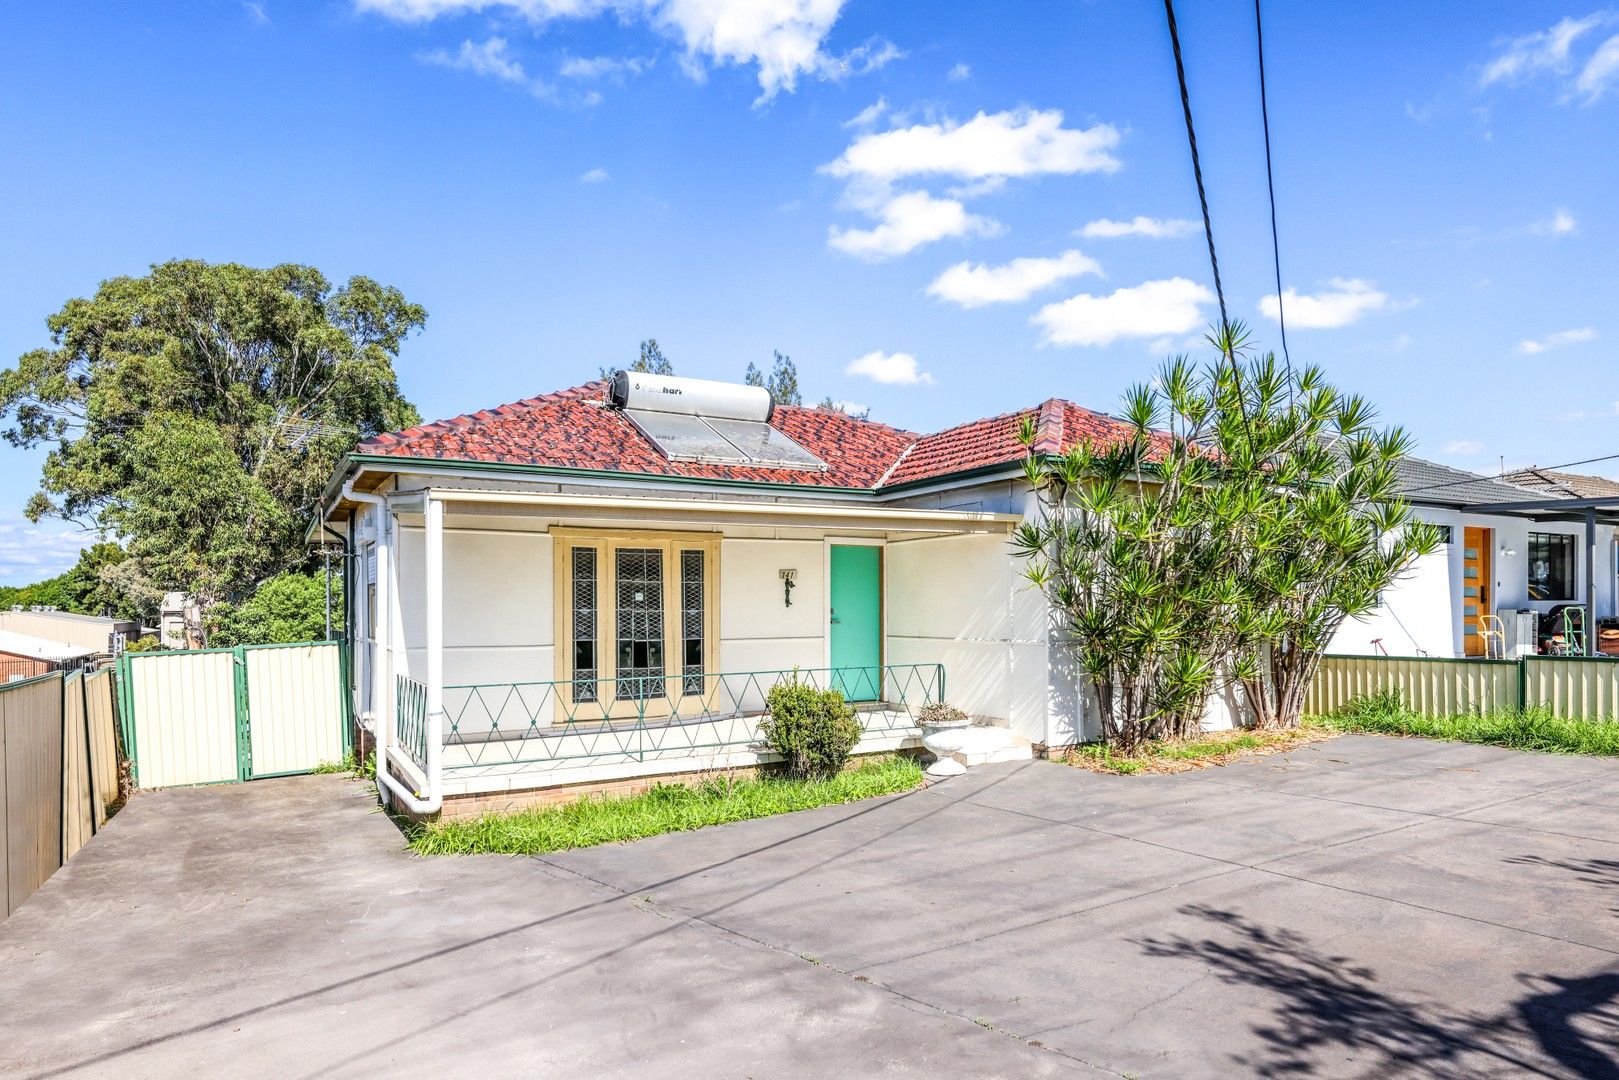 141 Orchardleigh St, Old Guildford NSW 2161, Image 0